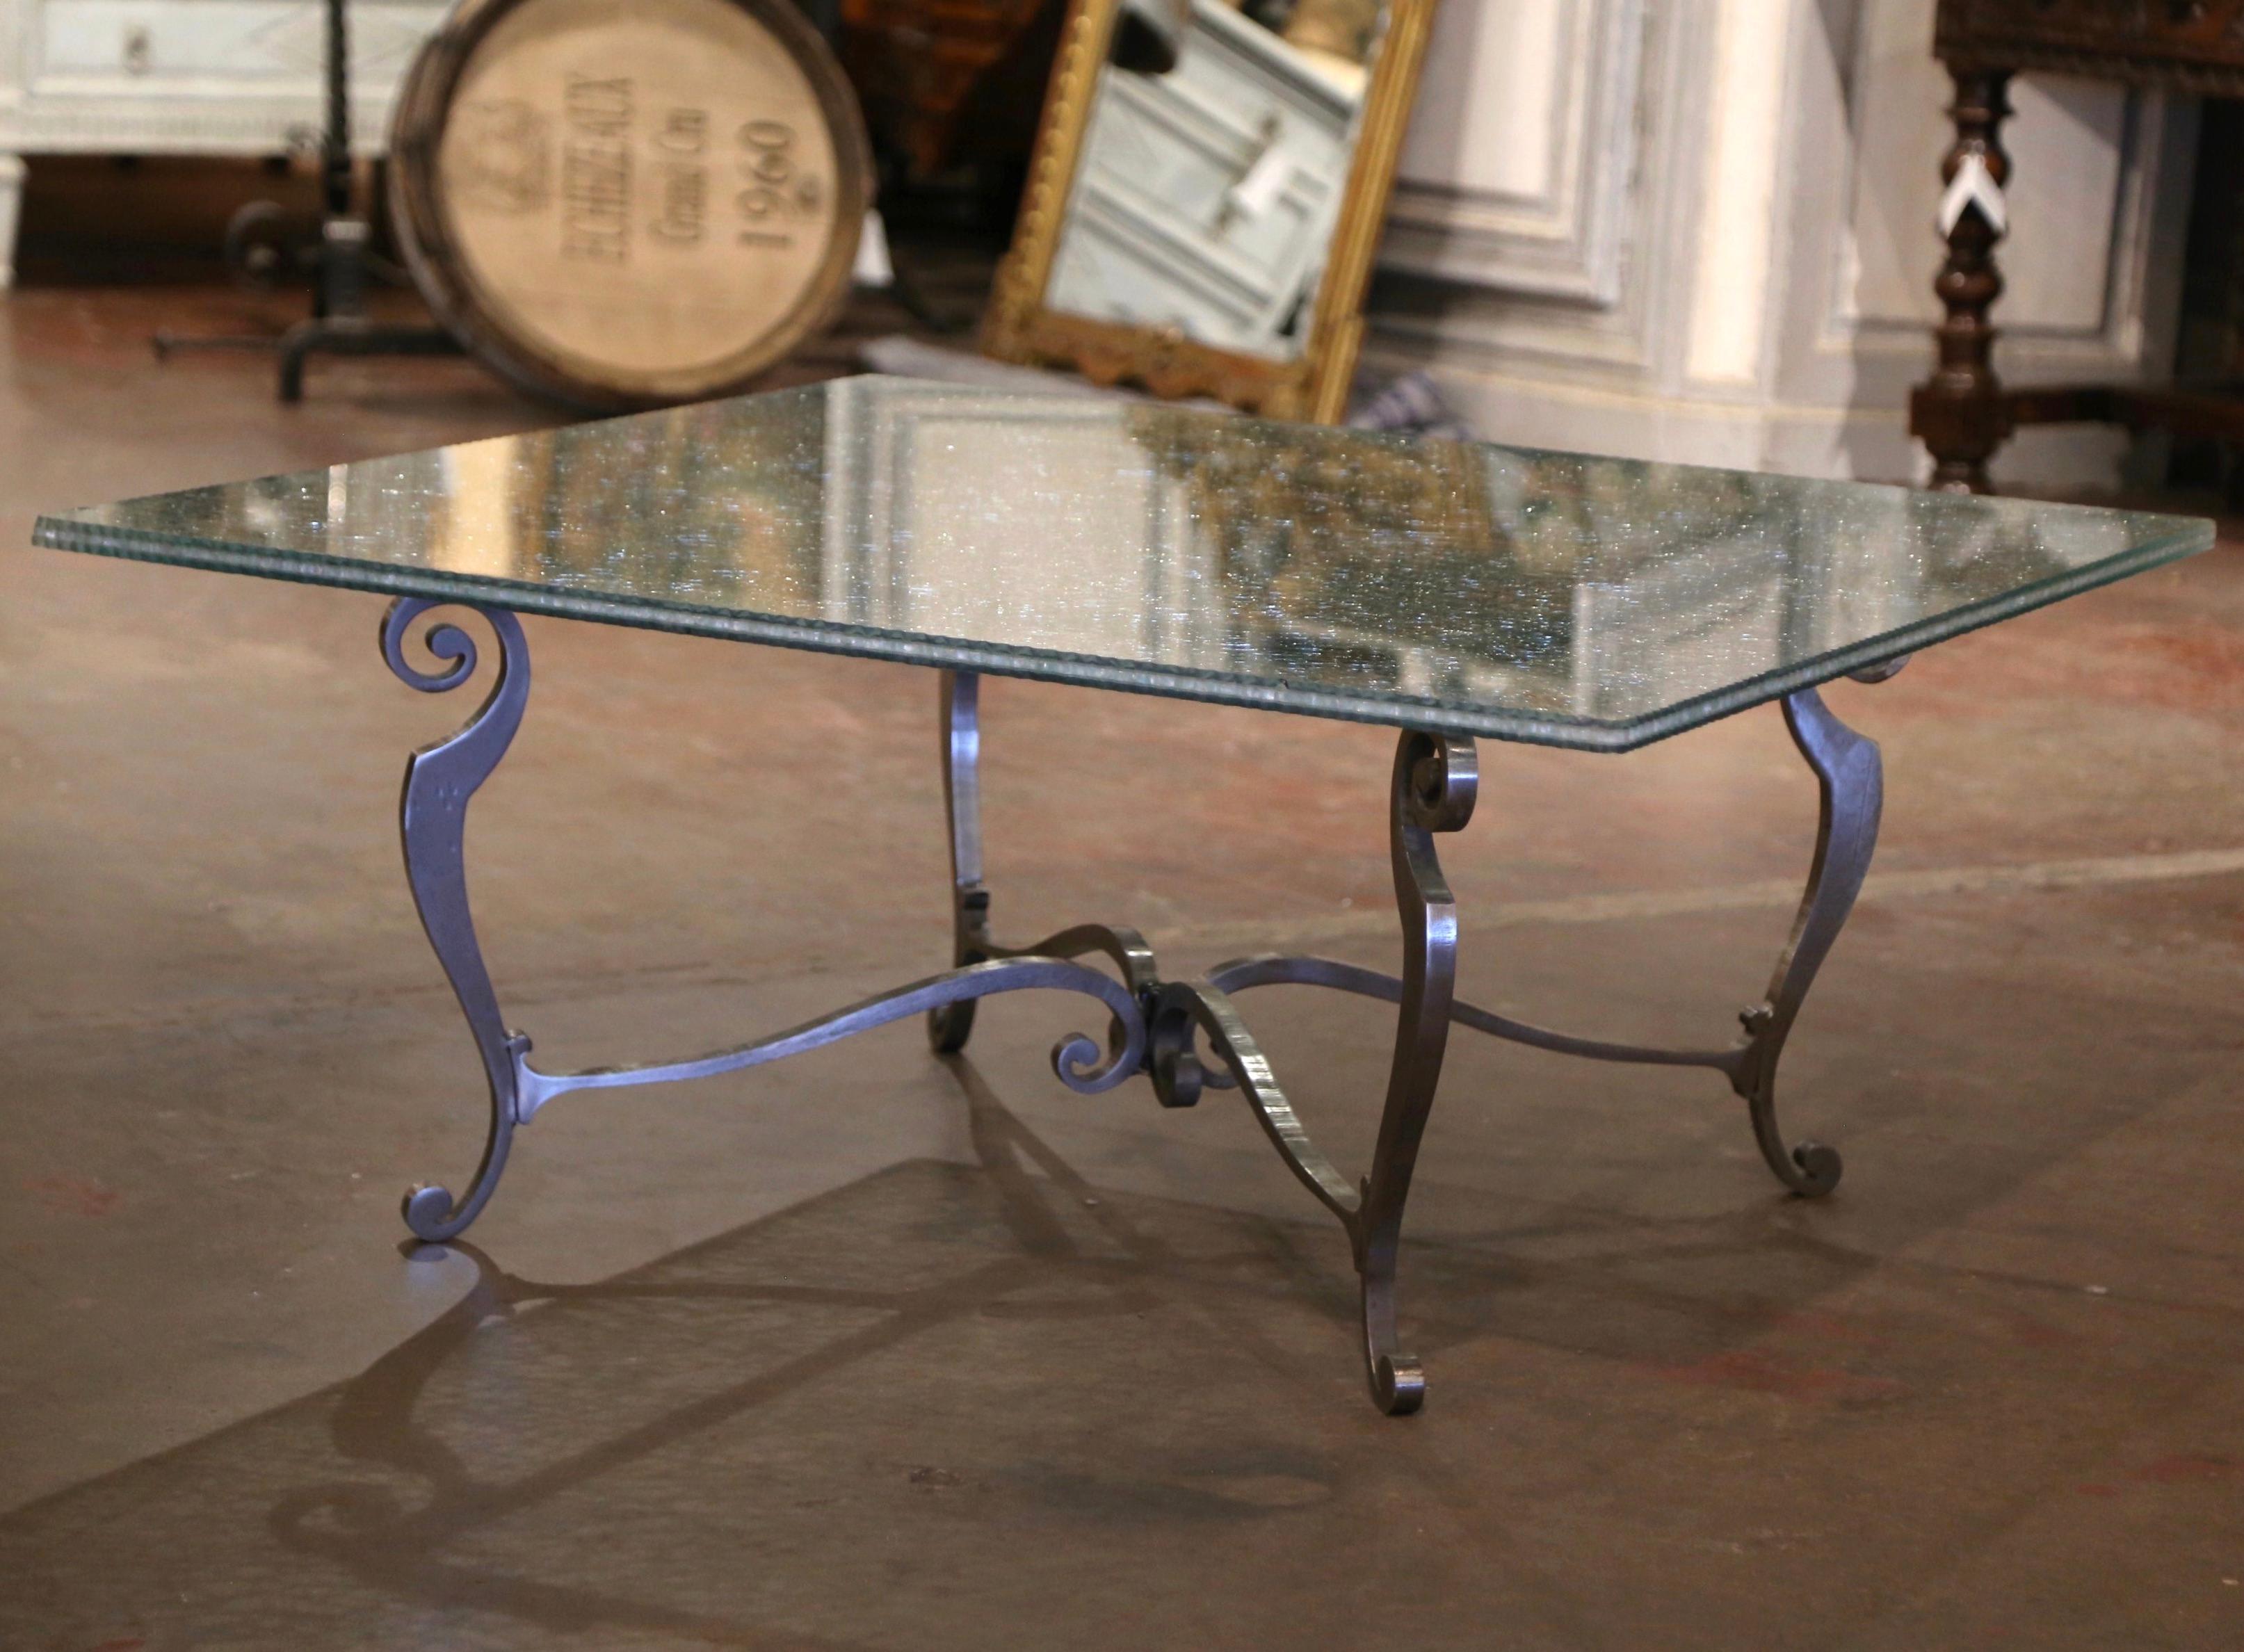 This unusual cocktail table would make an interesting addition to any living room, sitting area, office, or den. Square in shape, the elegant table stands on four cabriole legs, embellished with scroll motifs, and connected with a curved center